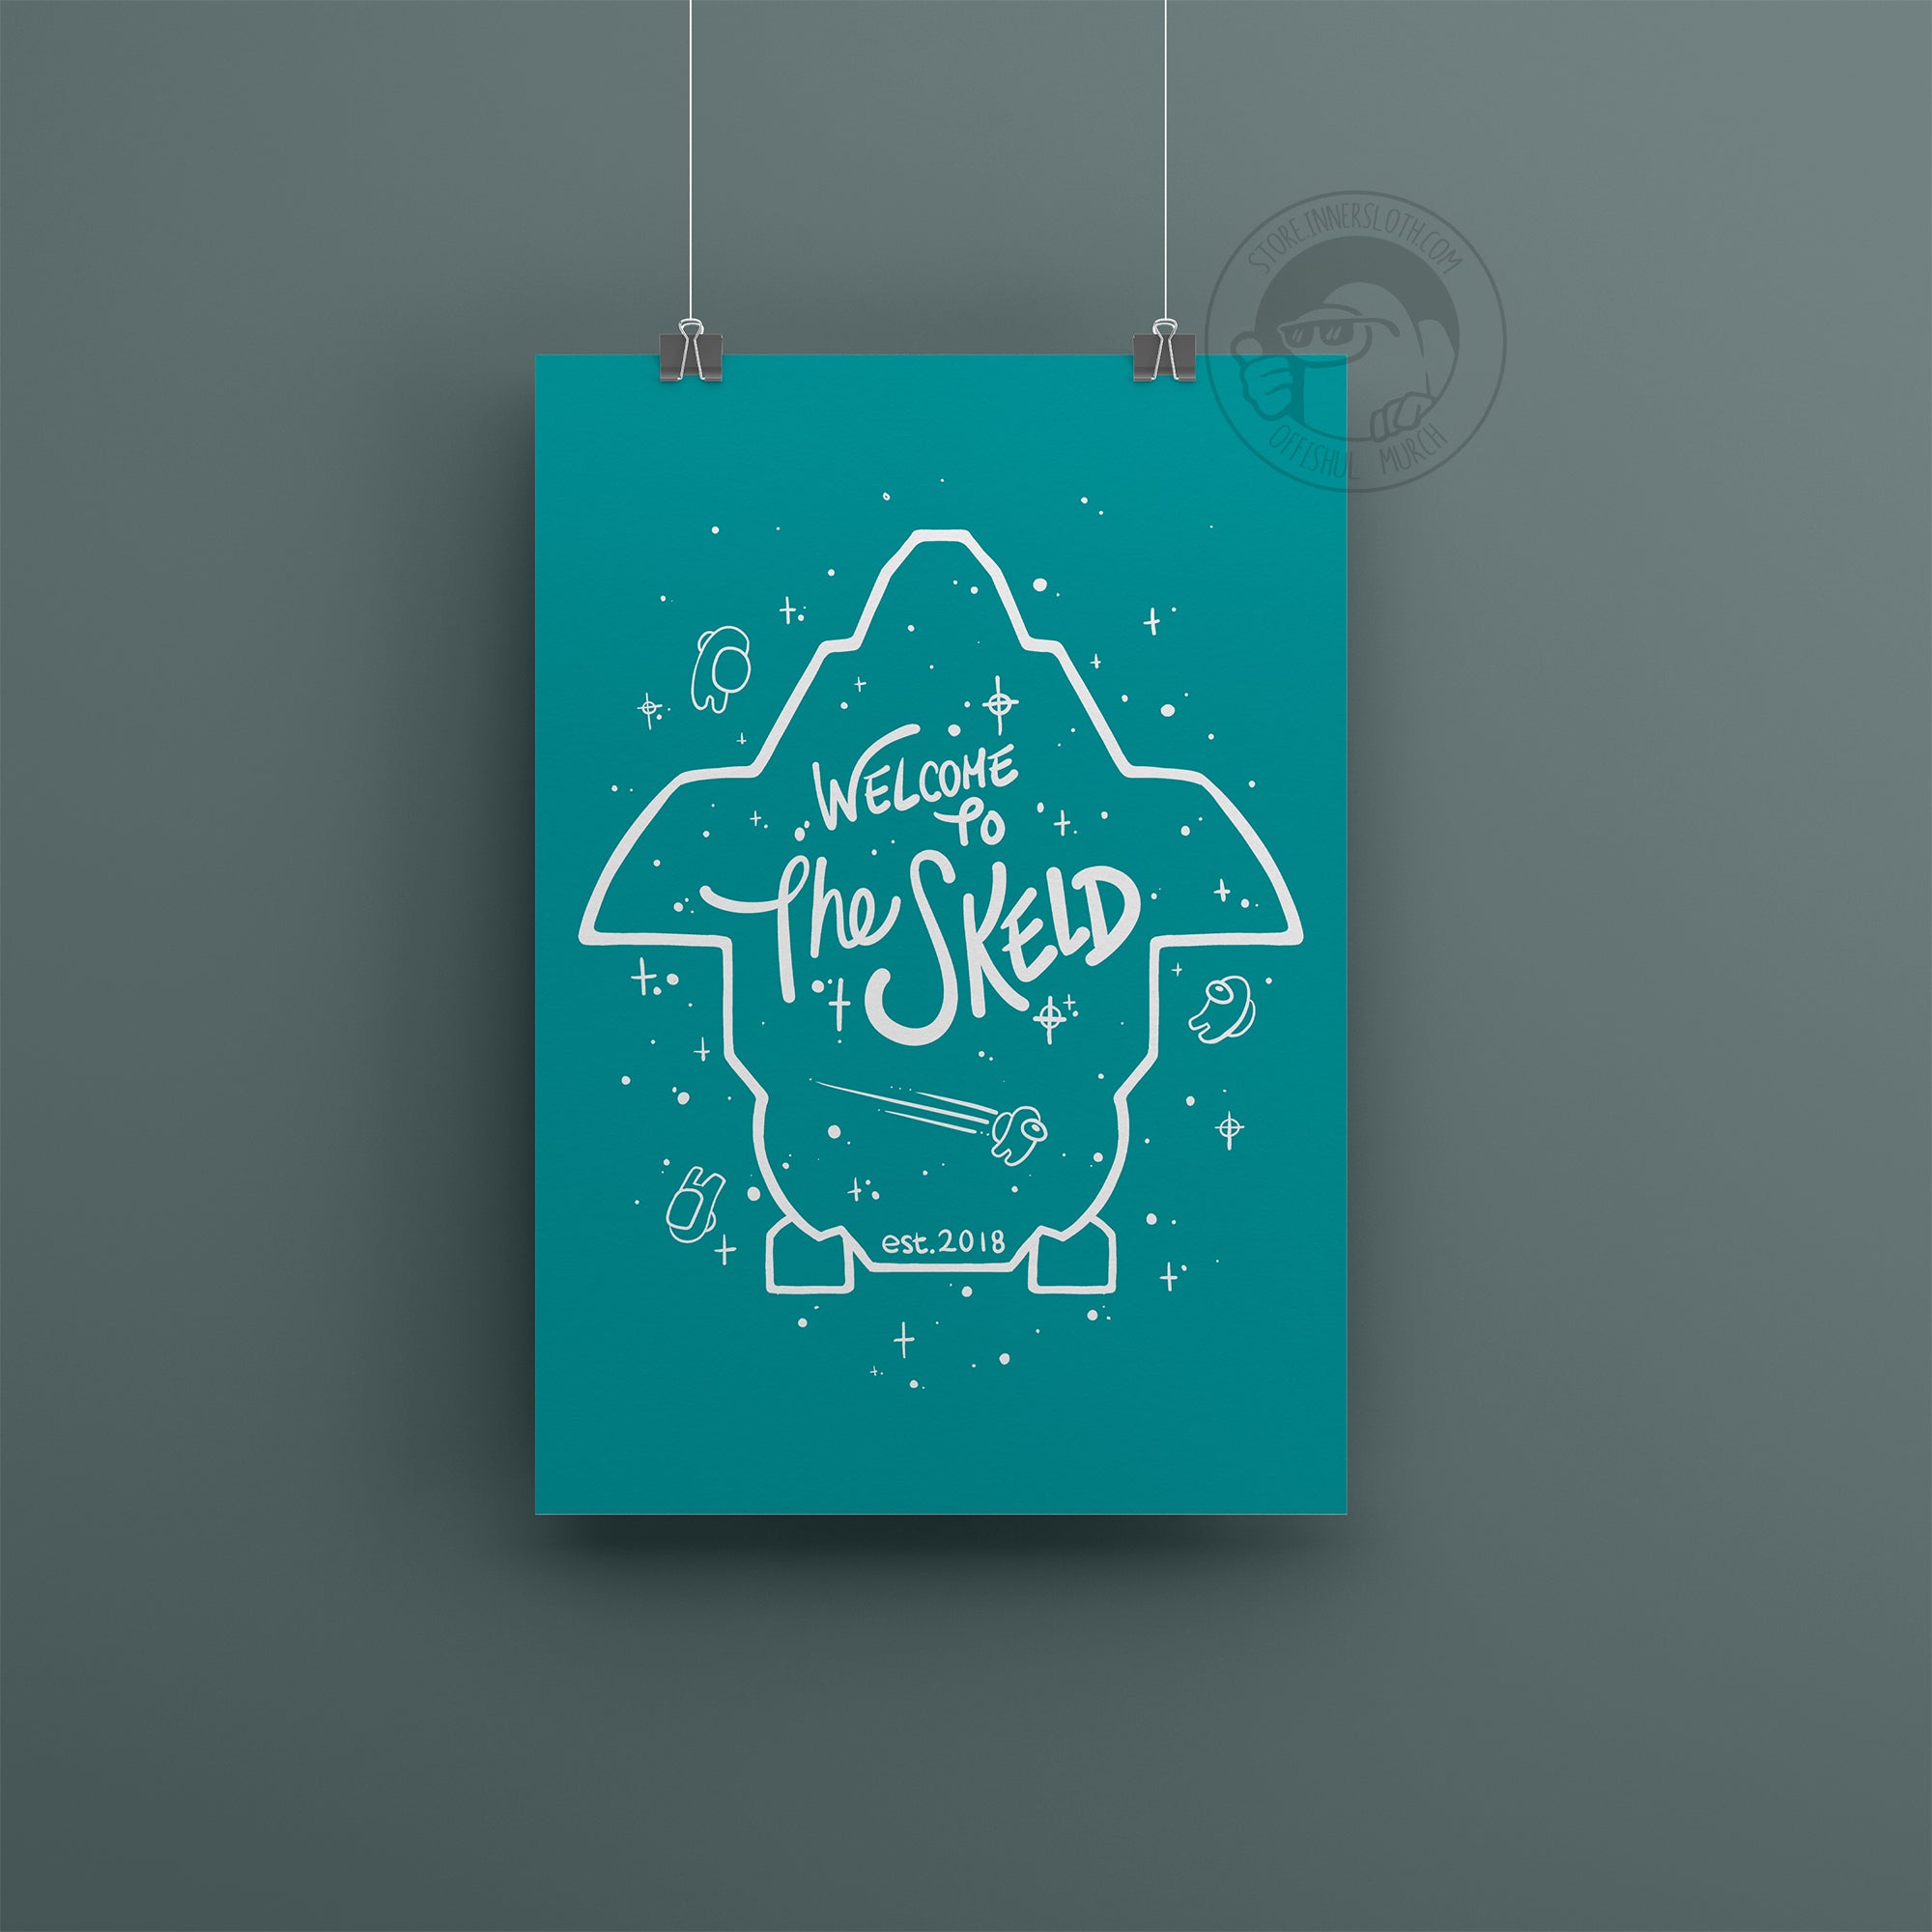 A product photo of the Among us: Welcome to The Skeld Poster. The white lineart on the teal background outlines the perimeter of the Skeld game map, with white stars and small crewmates sprinkled around it.